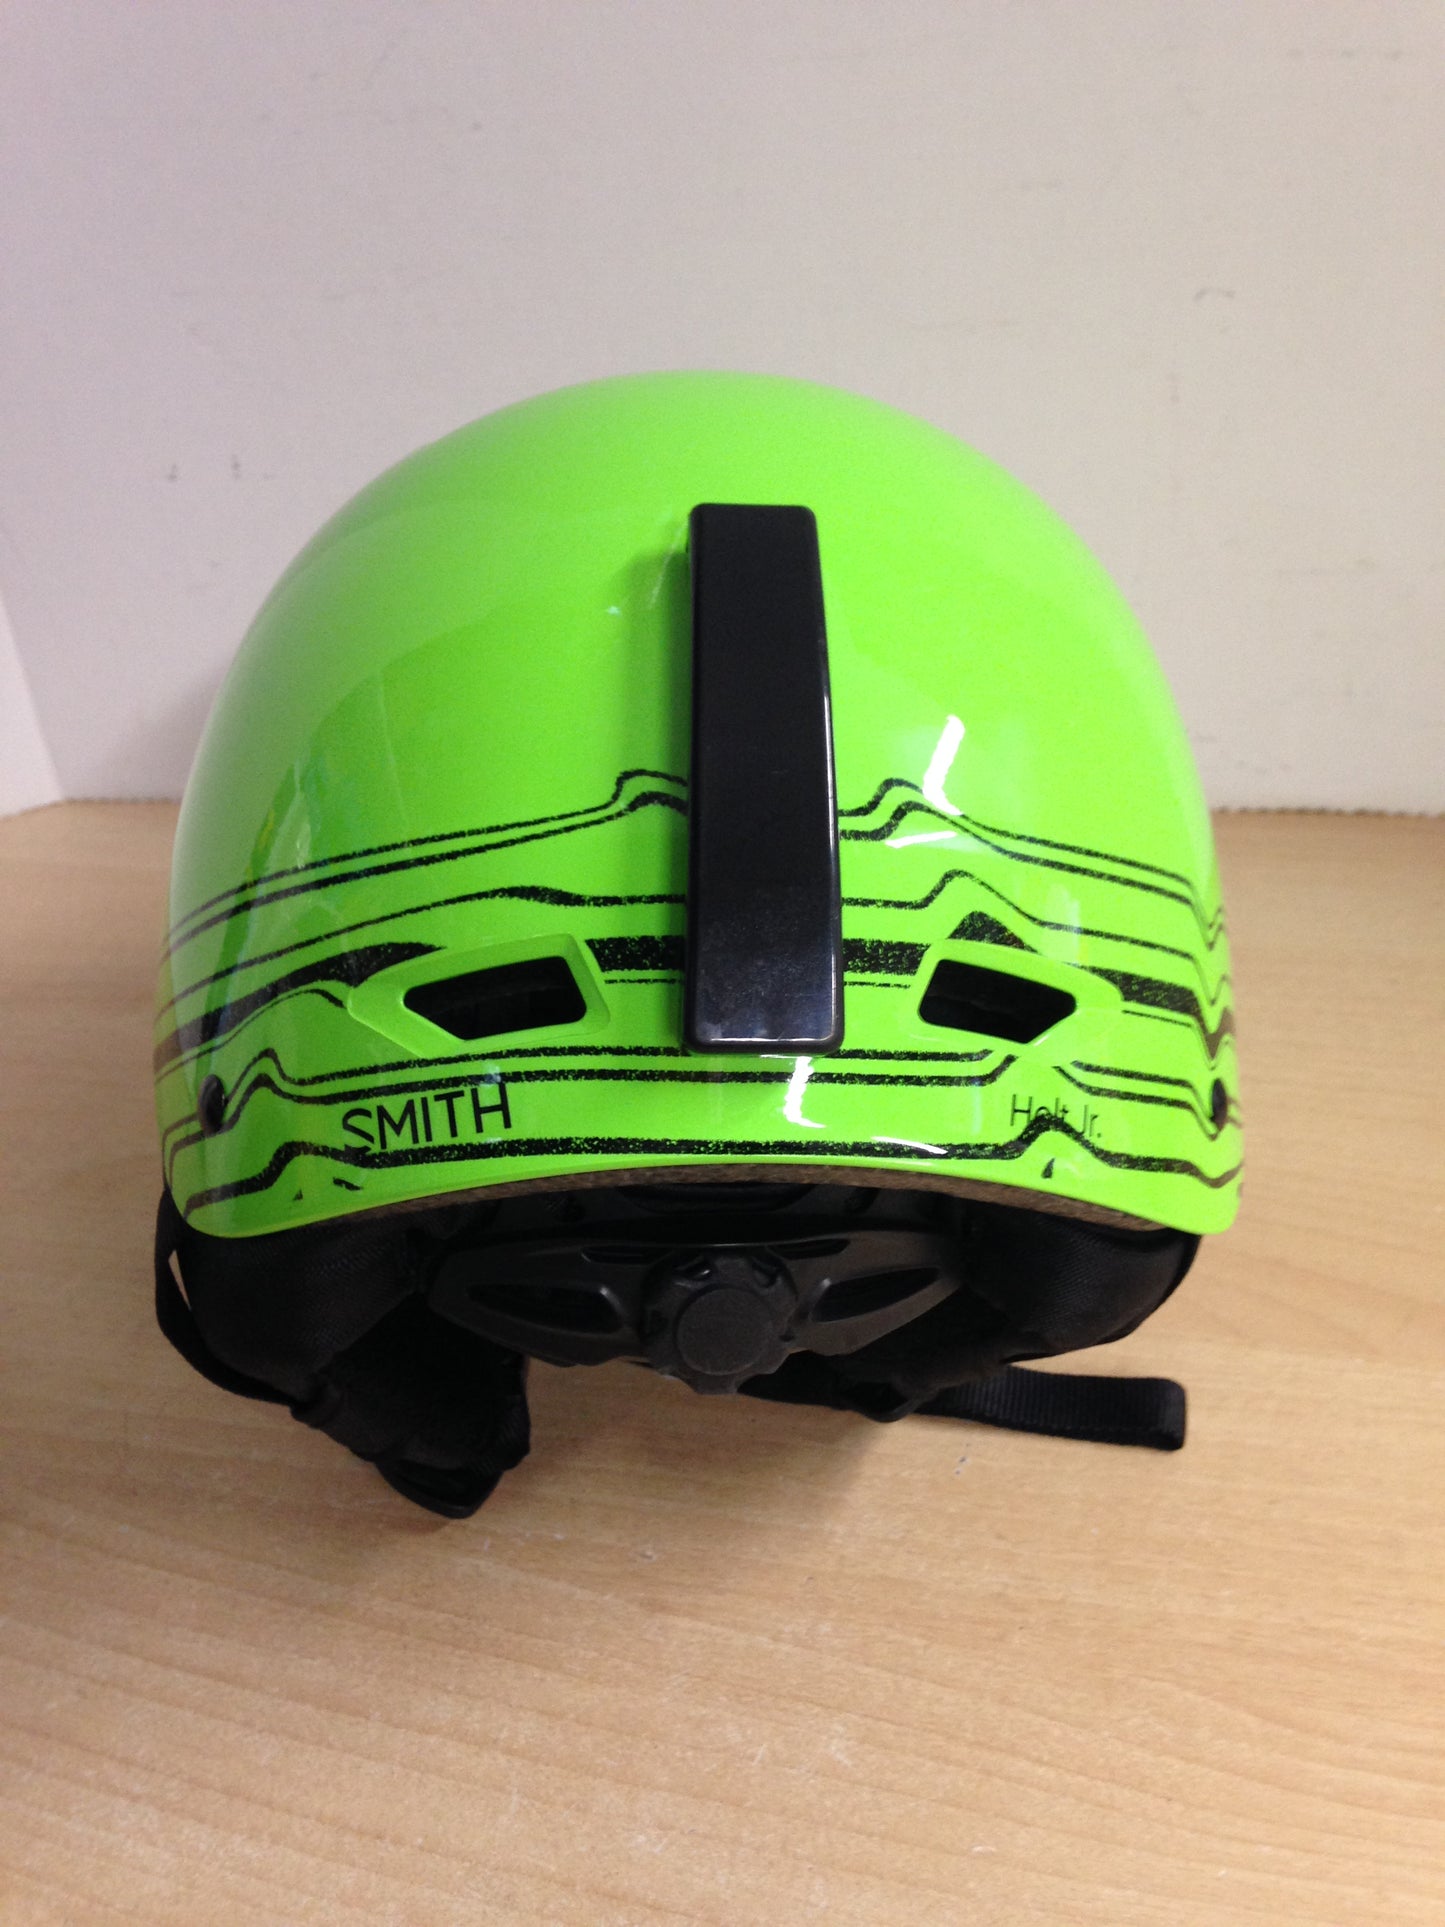 Ski Helmet Child Size Youth Medium 8-12 Smith Lime and Black As New